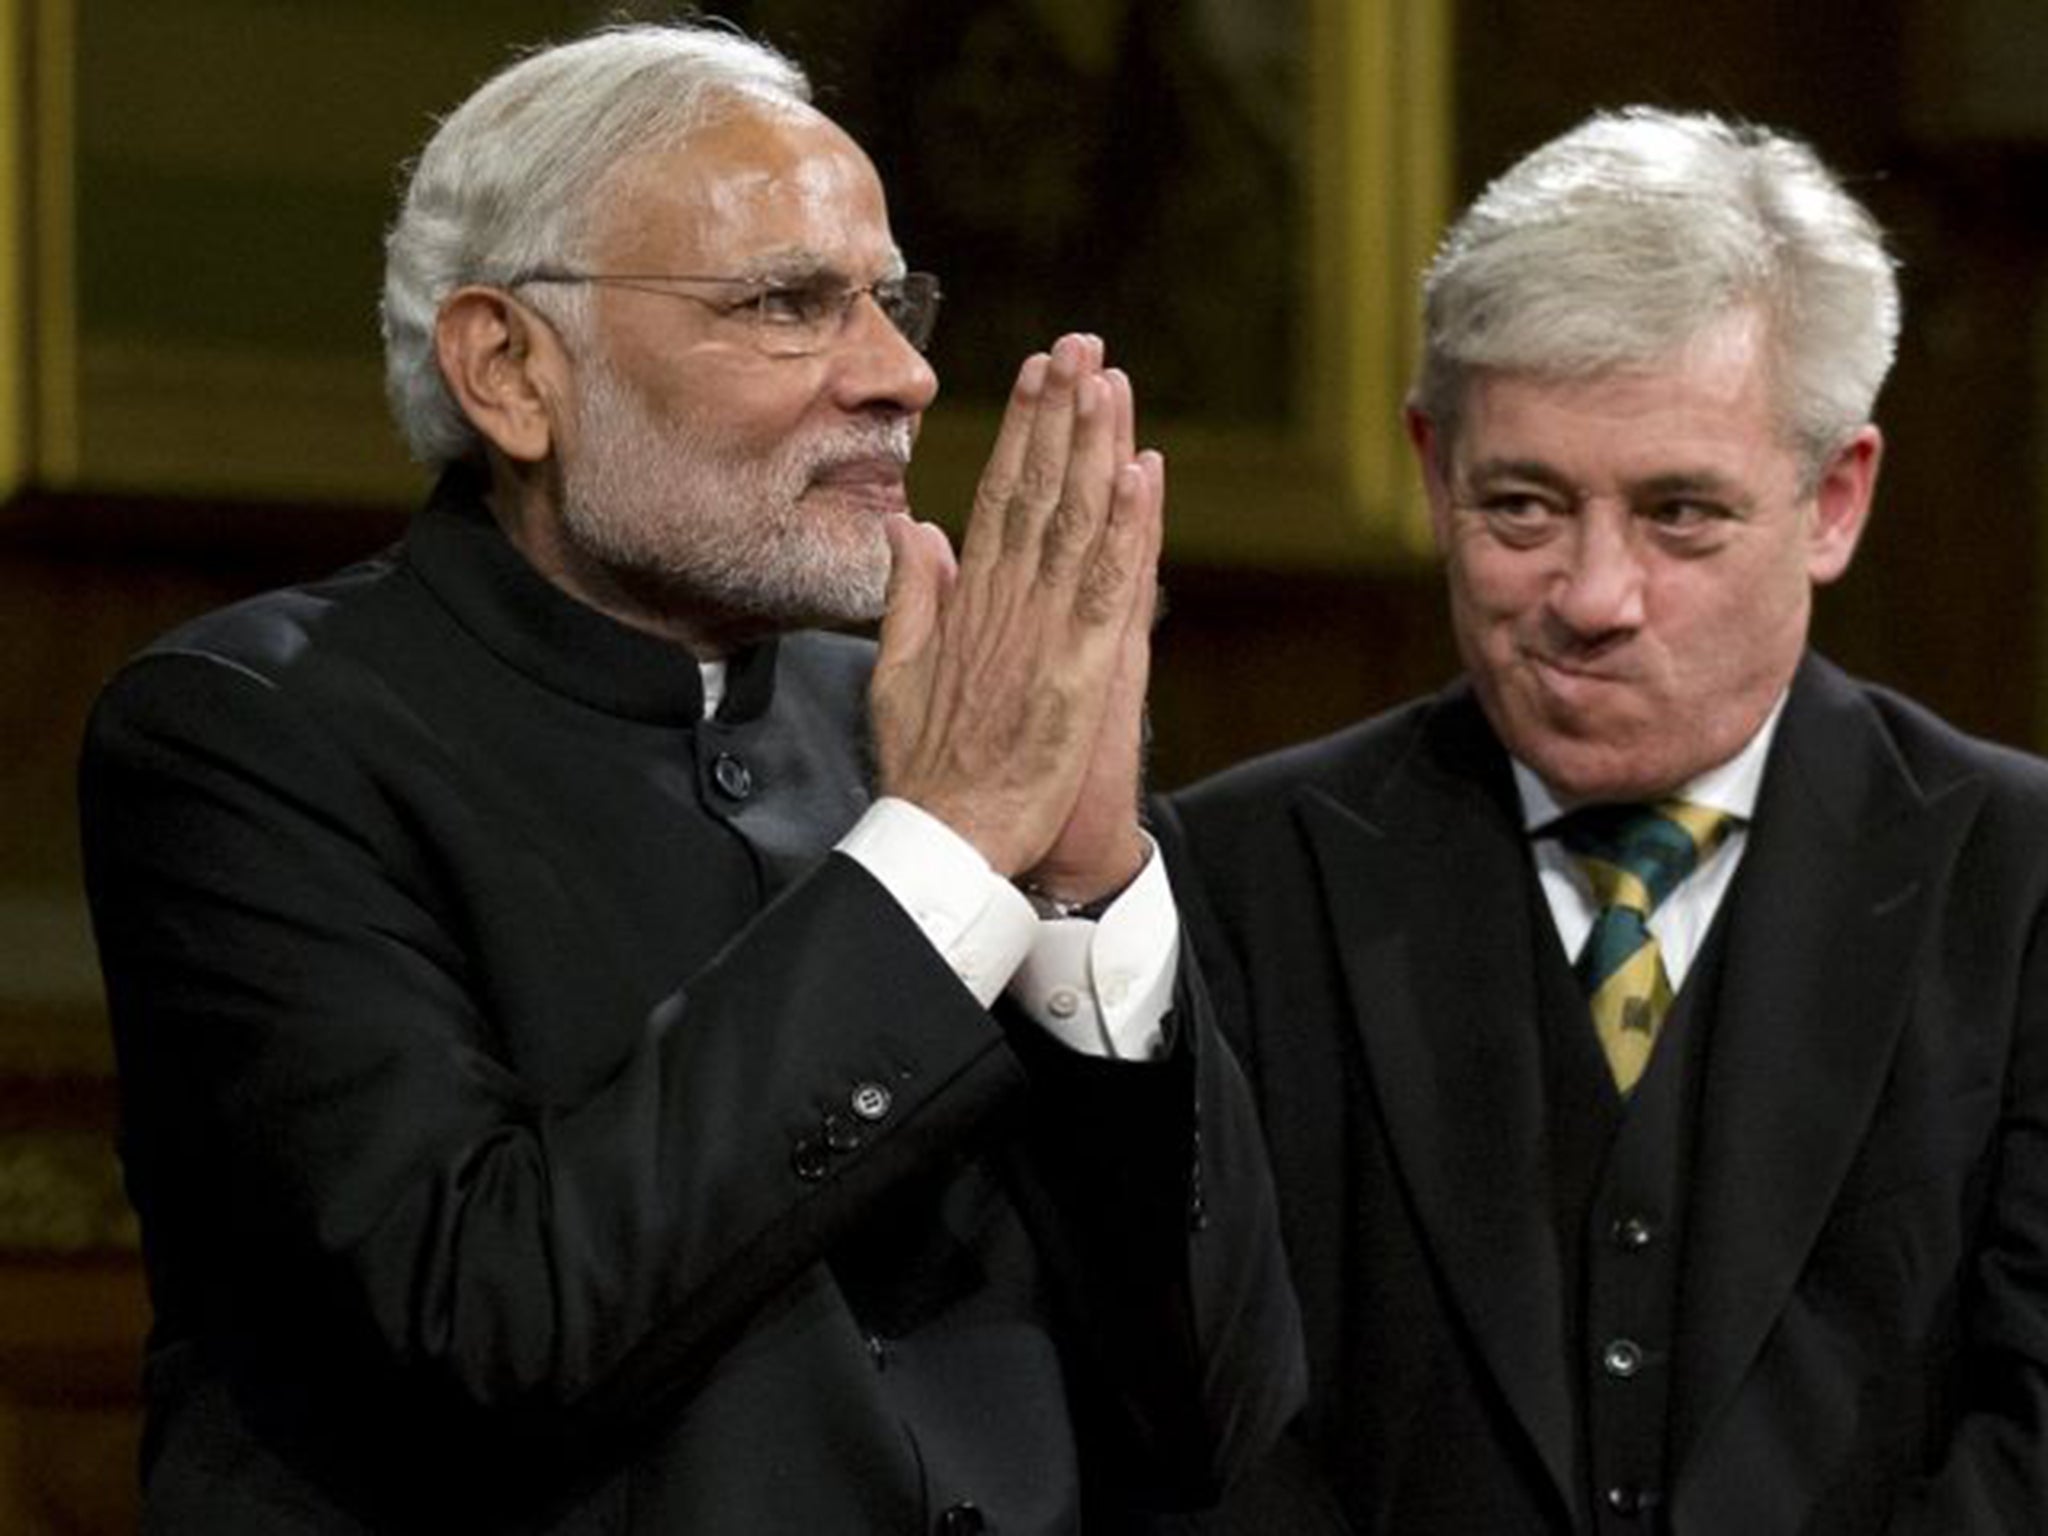 Narendra Modi with John Bercow, the Speaker of the House of Commons, after addressing the Royal Gallery of the Houses of Parliament